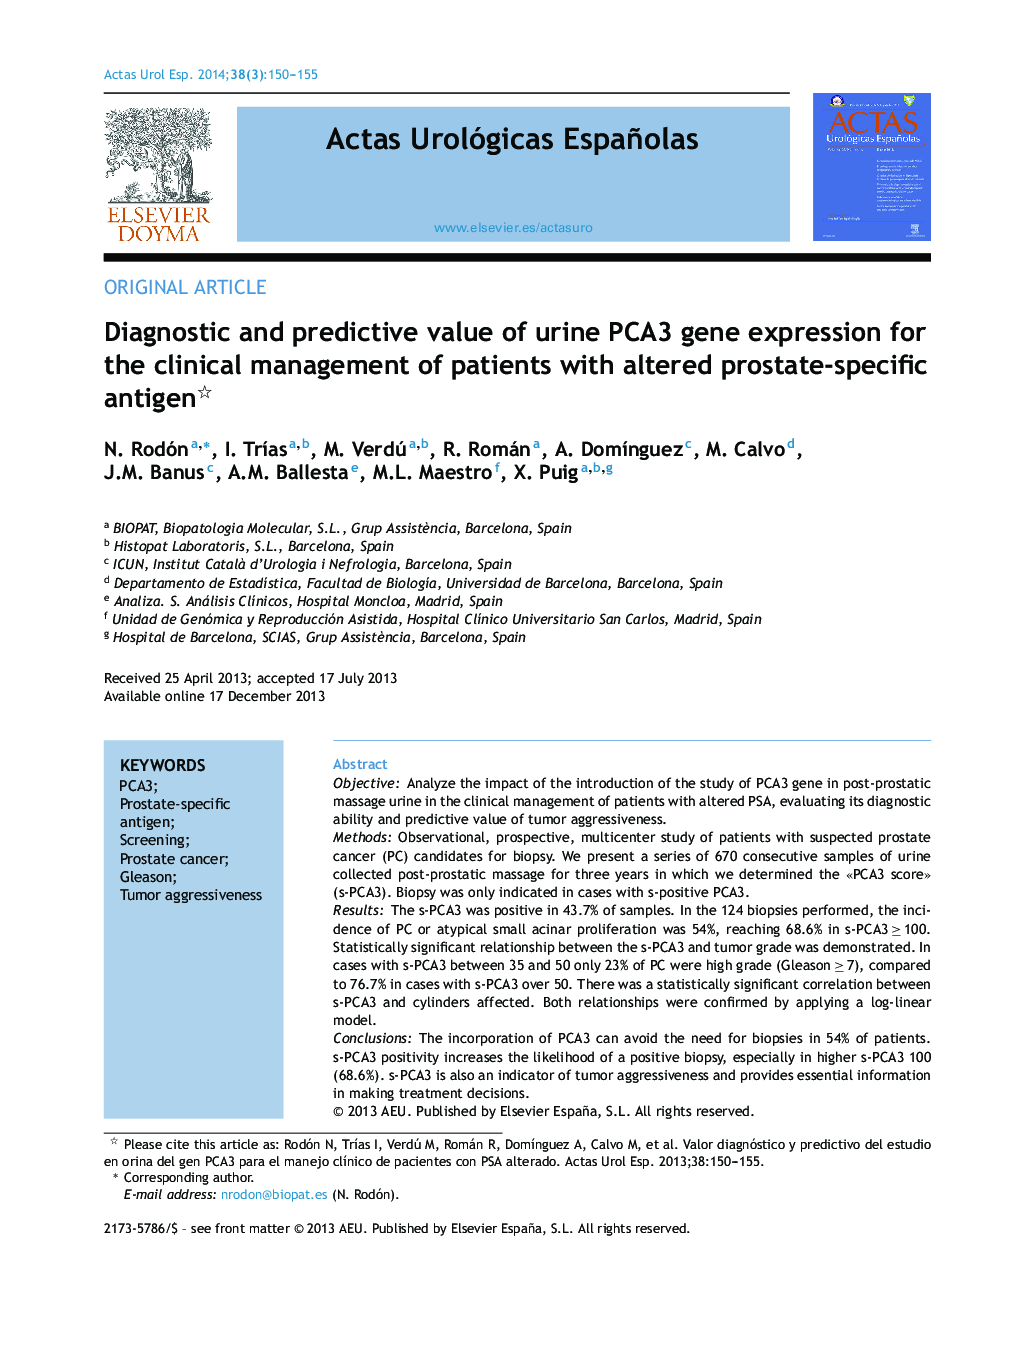 Diagnostic and predictive value of urine PCA3 gene expression for the clinical management of patients with altered prostate-specific antigen 